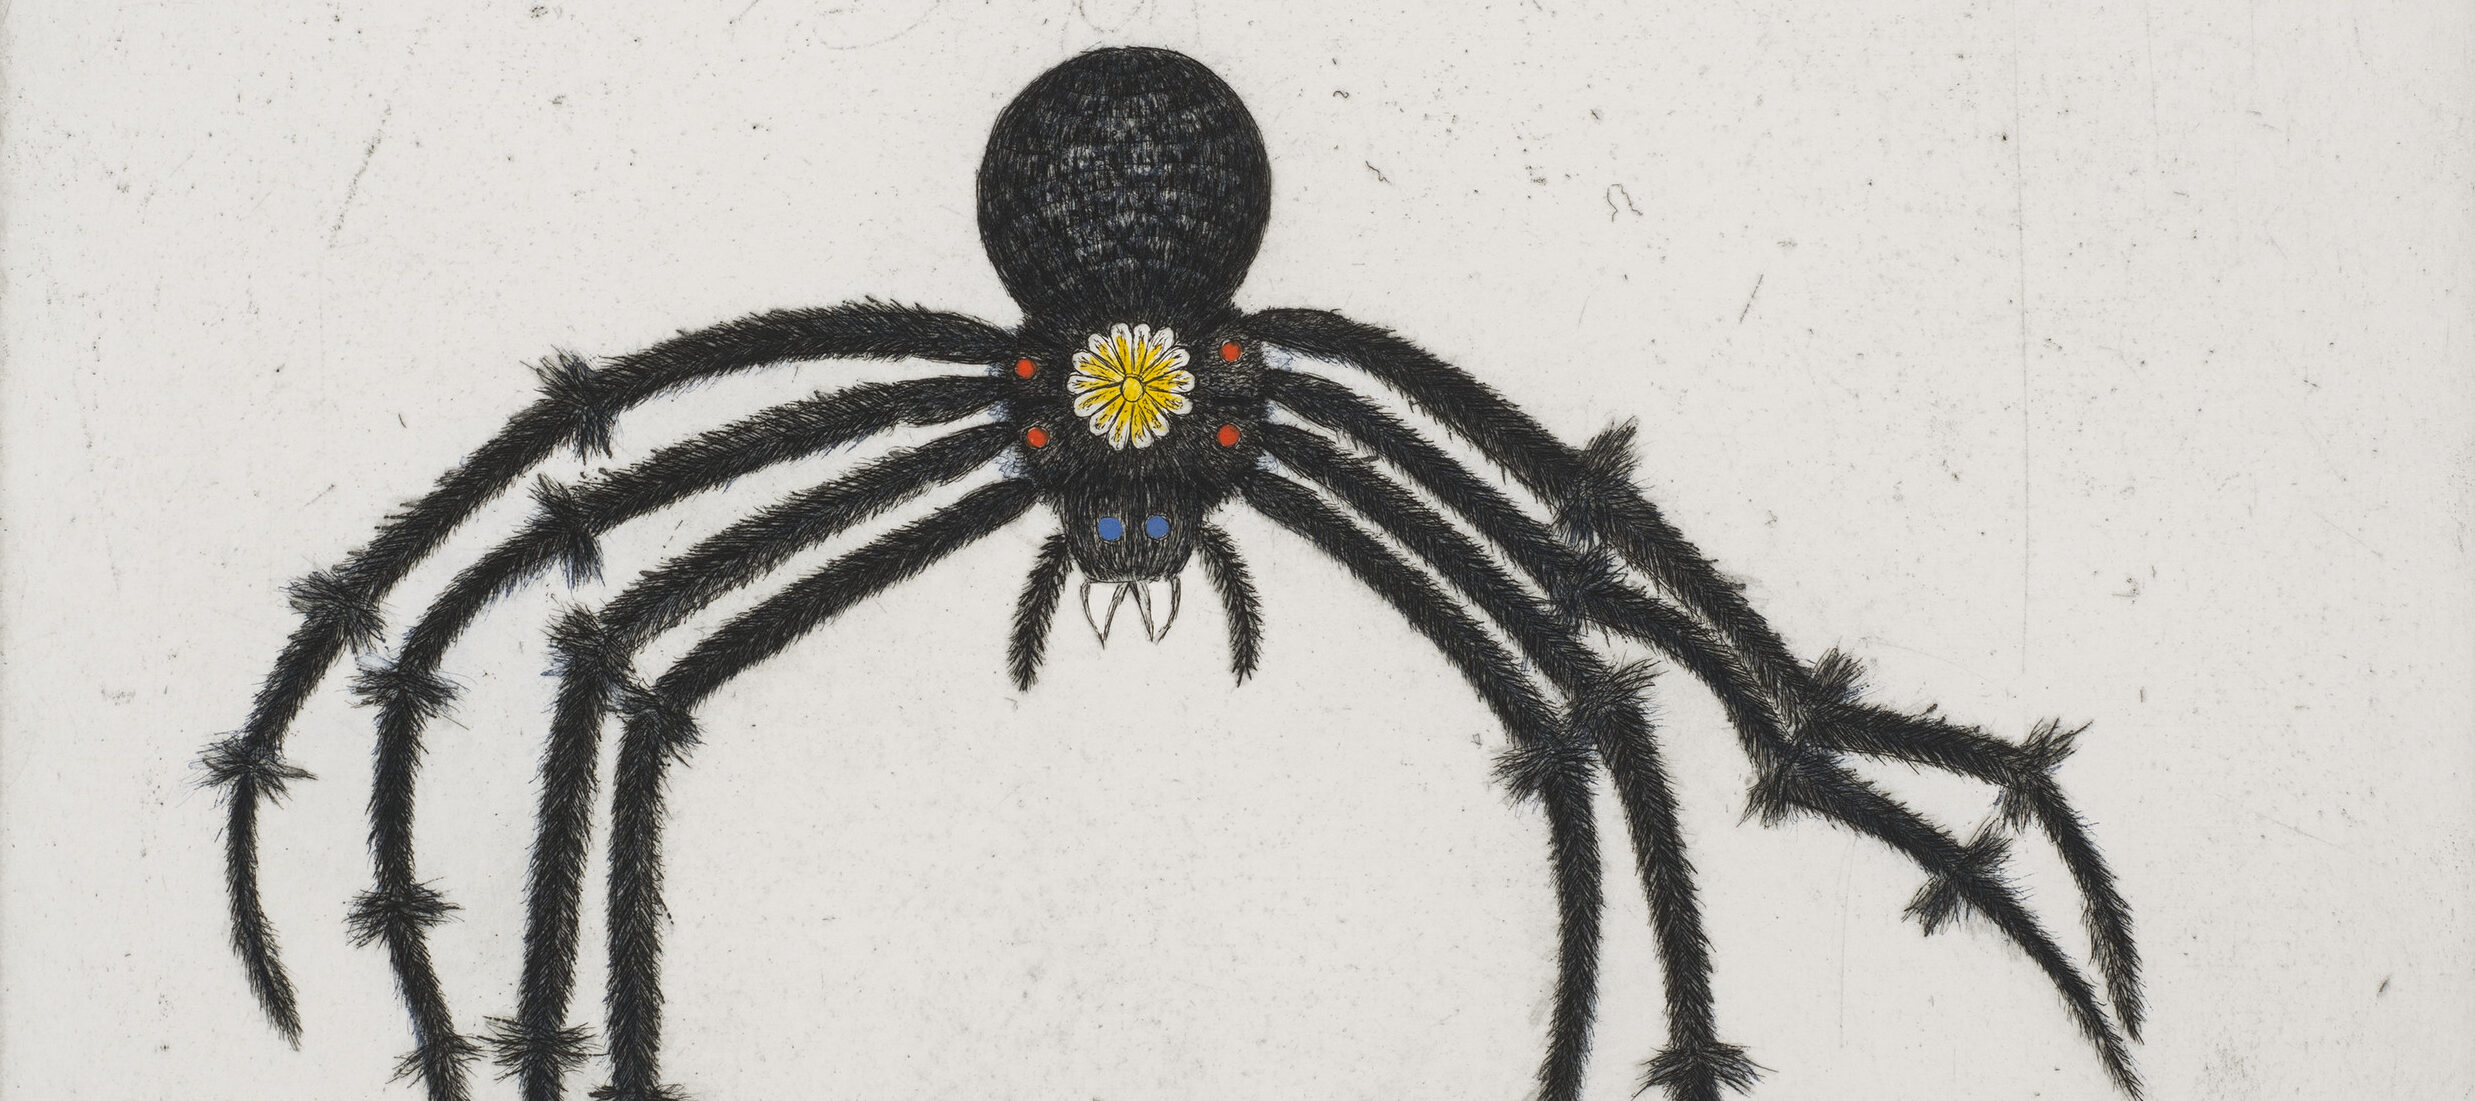 A deep auburn-colored octopus hovers above a larger, black spider with fuzzy legs, fangs, and blue eyes against a white background. There is a small white and yellow flower on the spider’s thorax and two red dots on each side of the flower.